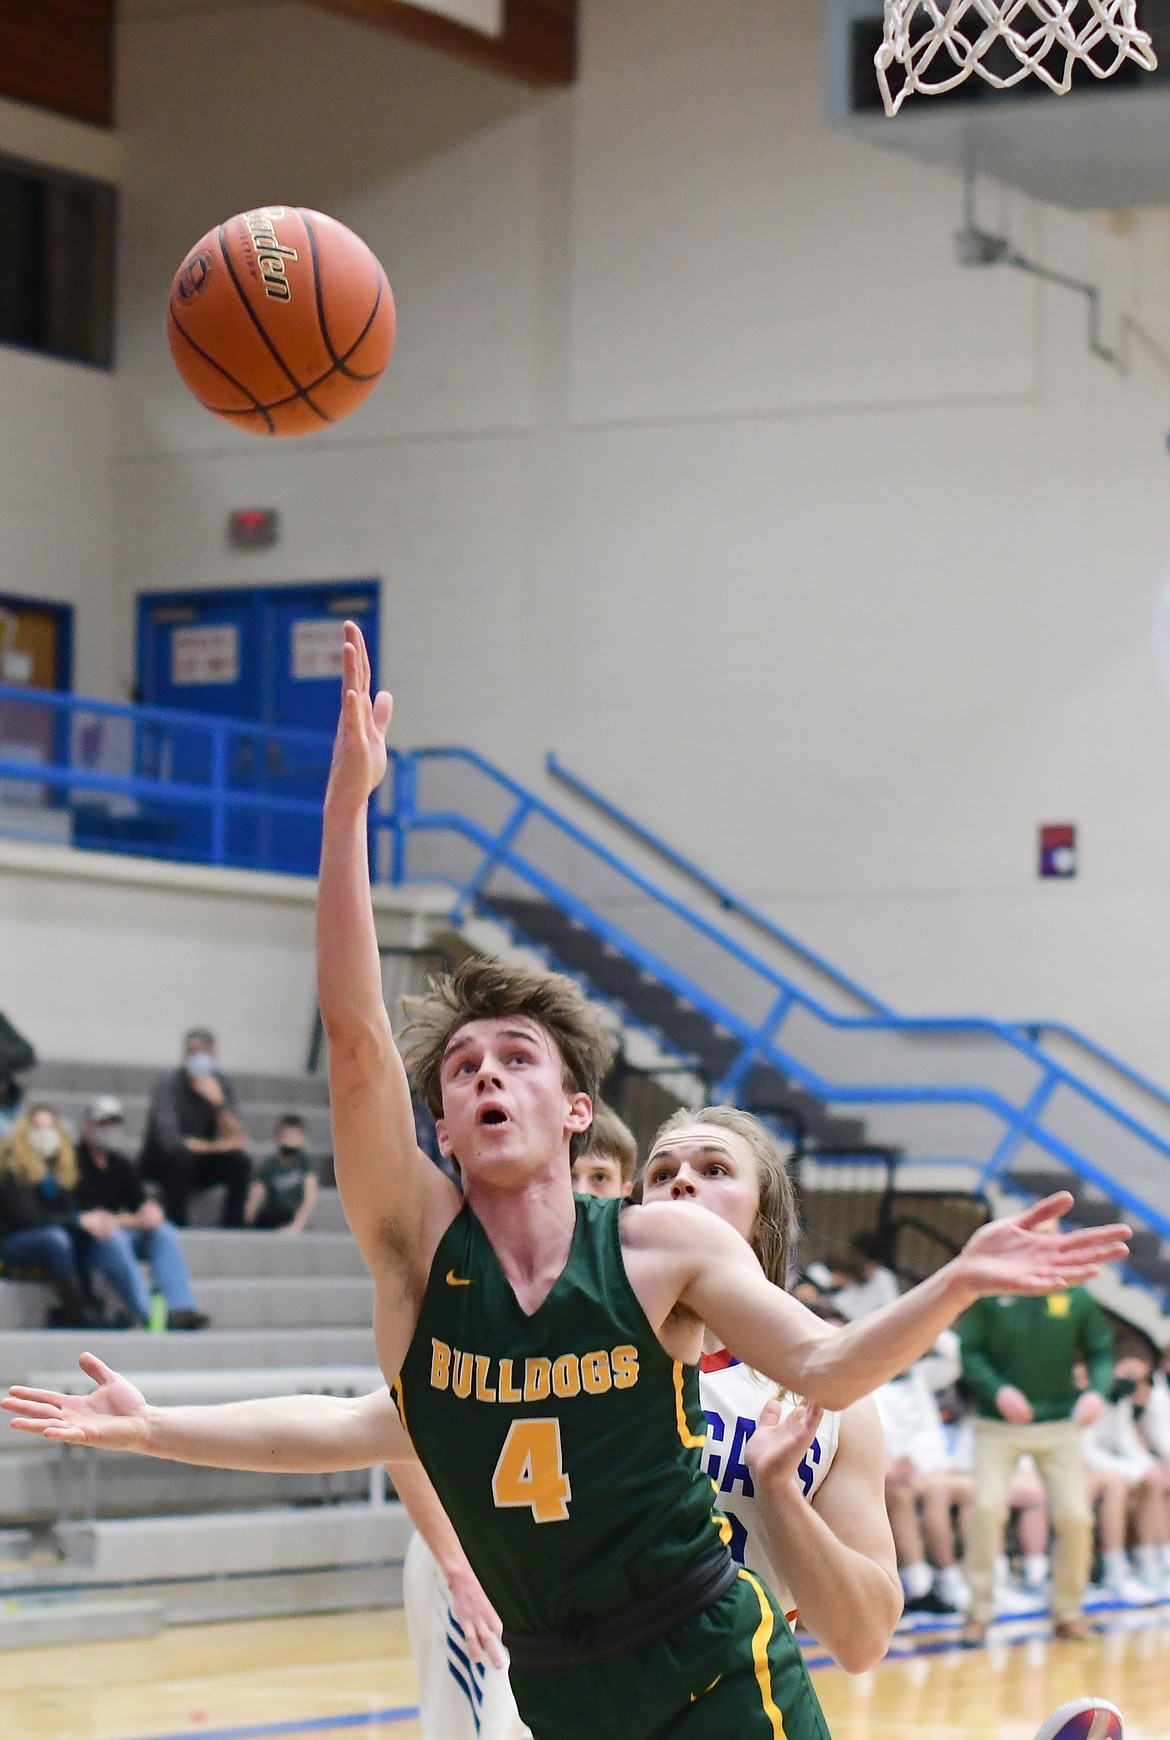 Bodie Smith (4) goes for the layup in a game against Columbia Falls on Friday. (Teresa Byrd/Hungry Horse News)